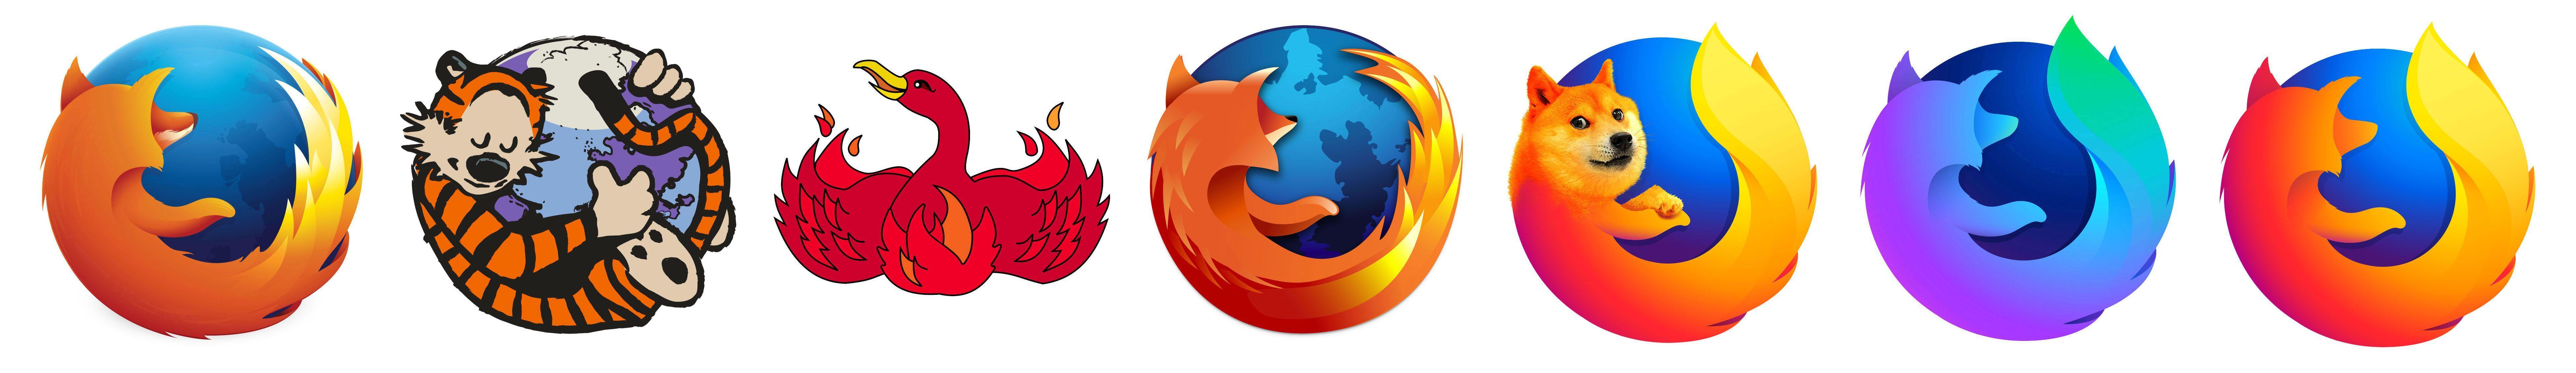 mozilla firefox old version 35 free download